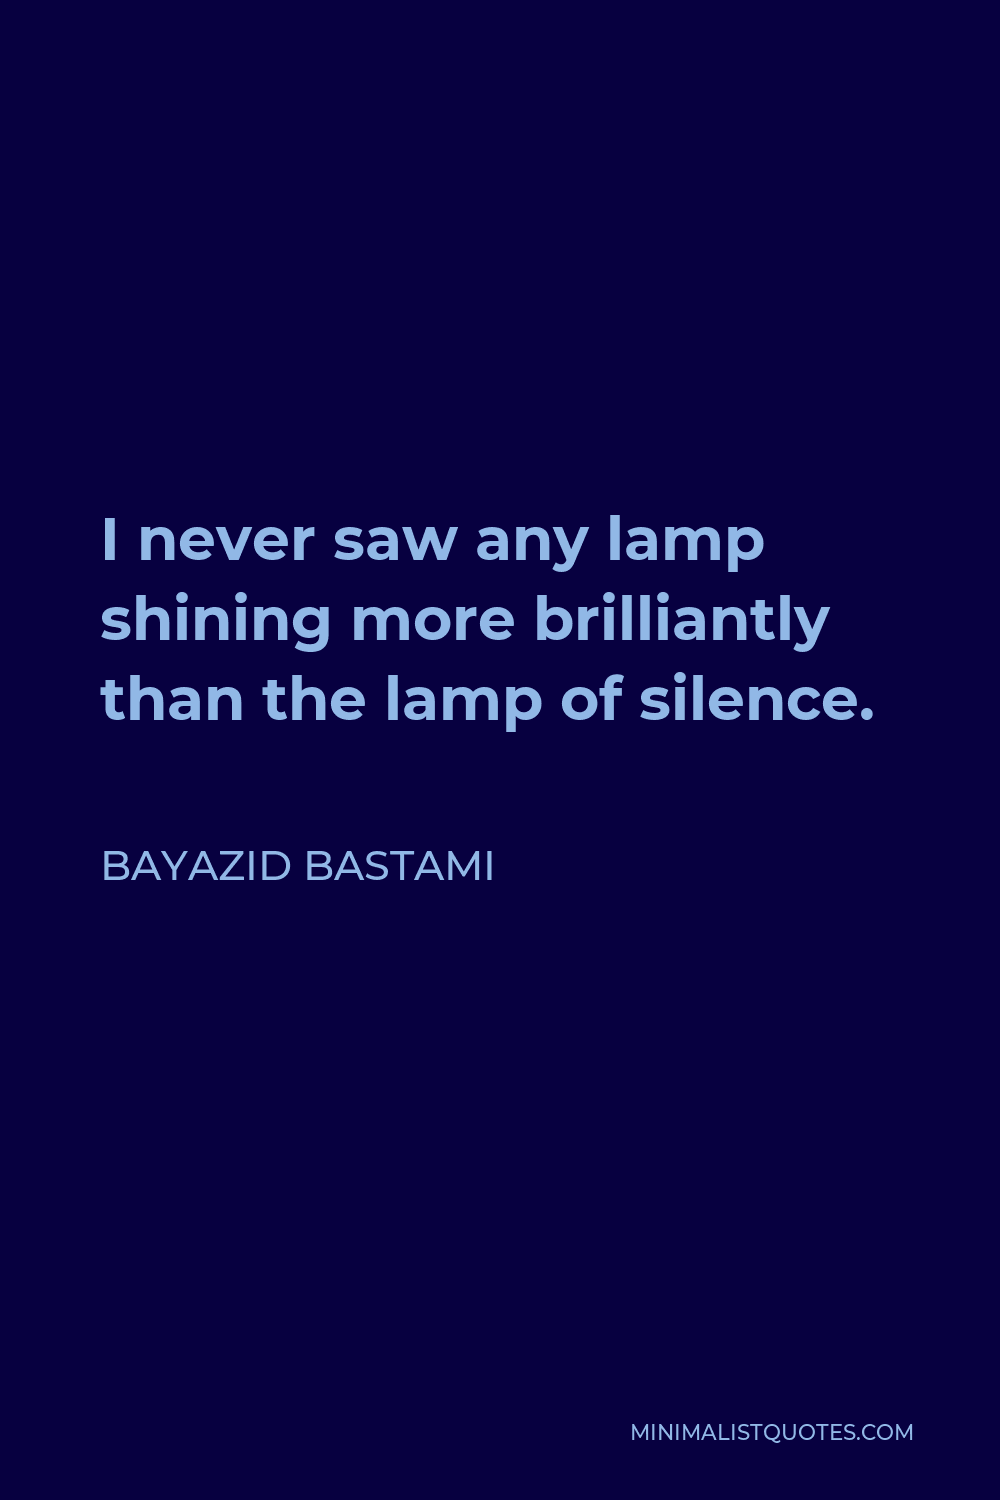 Bayazid Bastami Quote - I never saw any lamp shining more brilliantly than the lamp of silence.